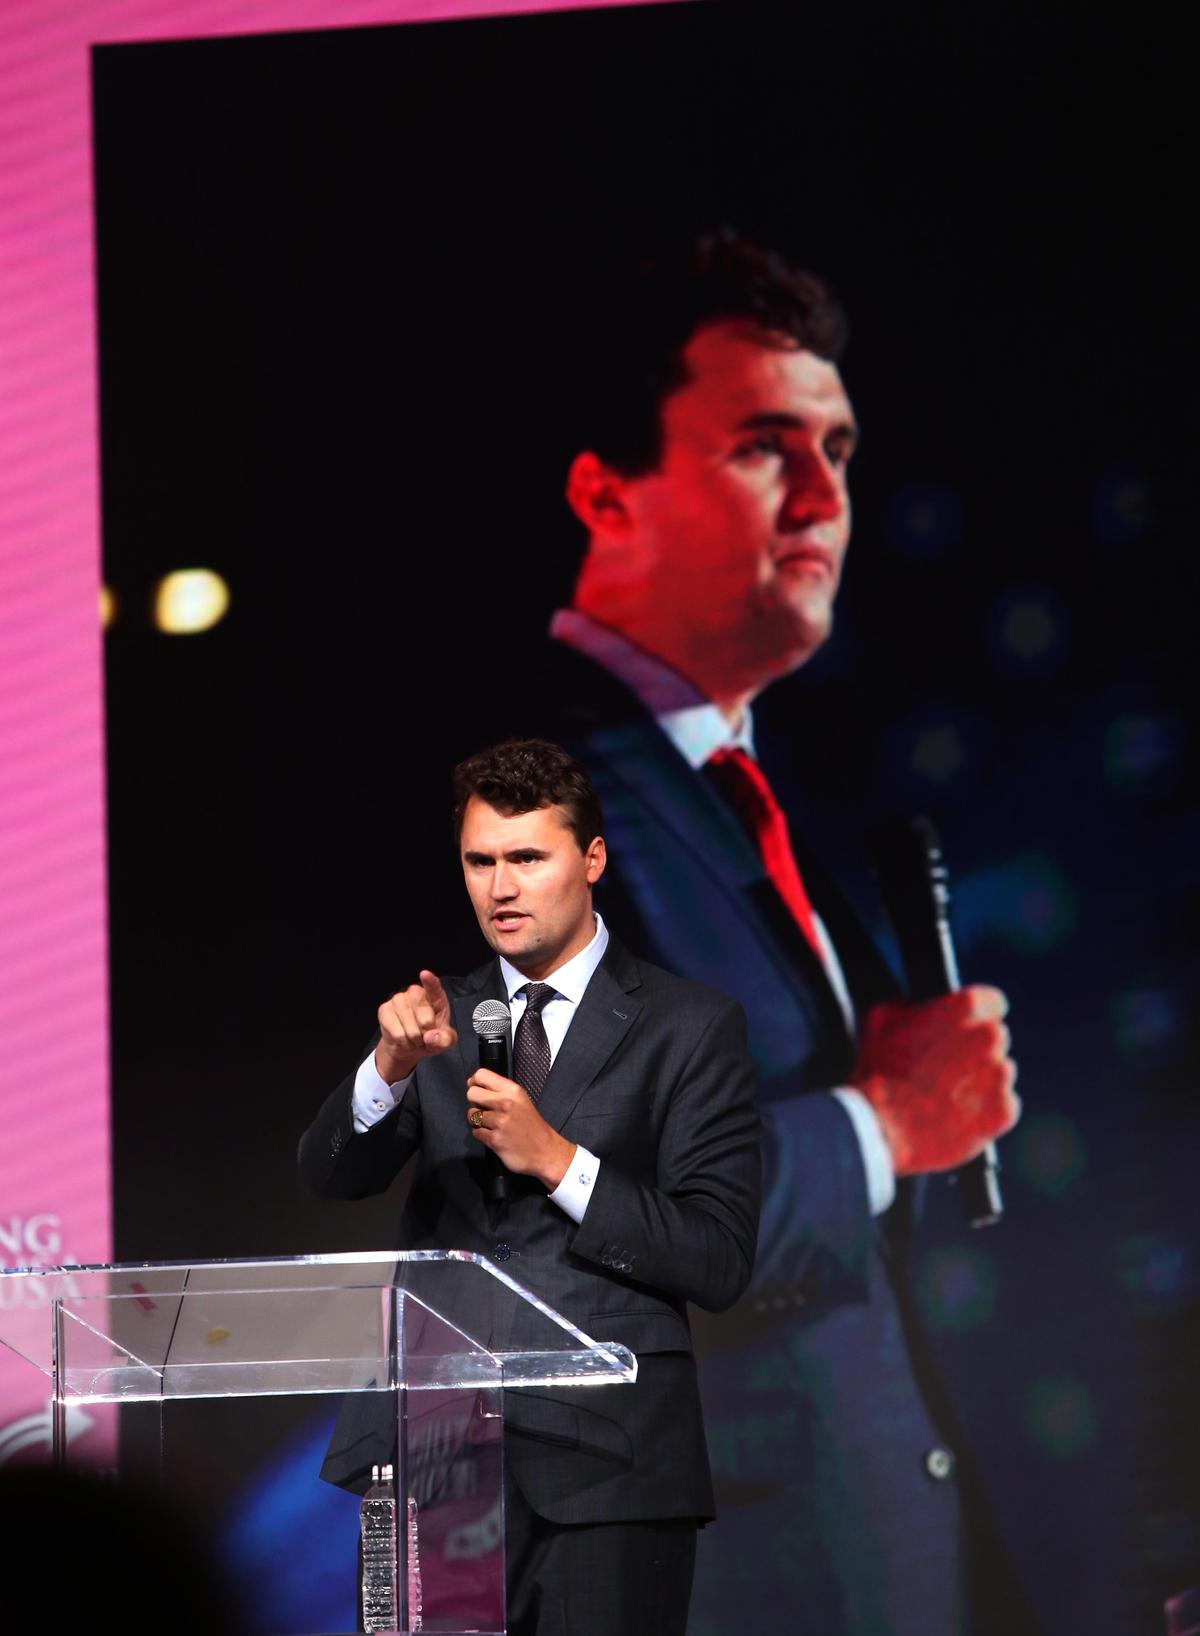 Charlie Kirk speaks at the Young Women’s Leadership Summit at the Gaylord Texan Resort and Convention Center in Grapevine, Texas, on June 10, 2023. (Bobby Sanchez/The Epoch Times)